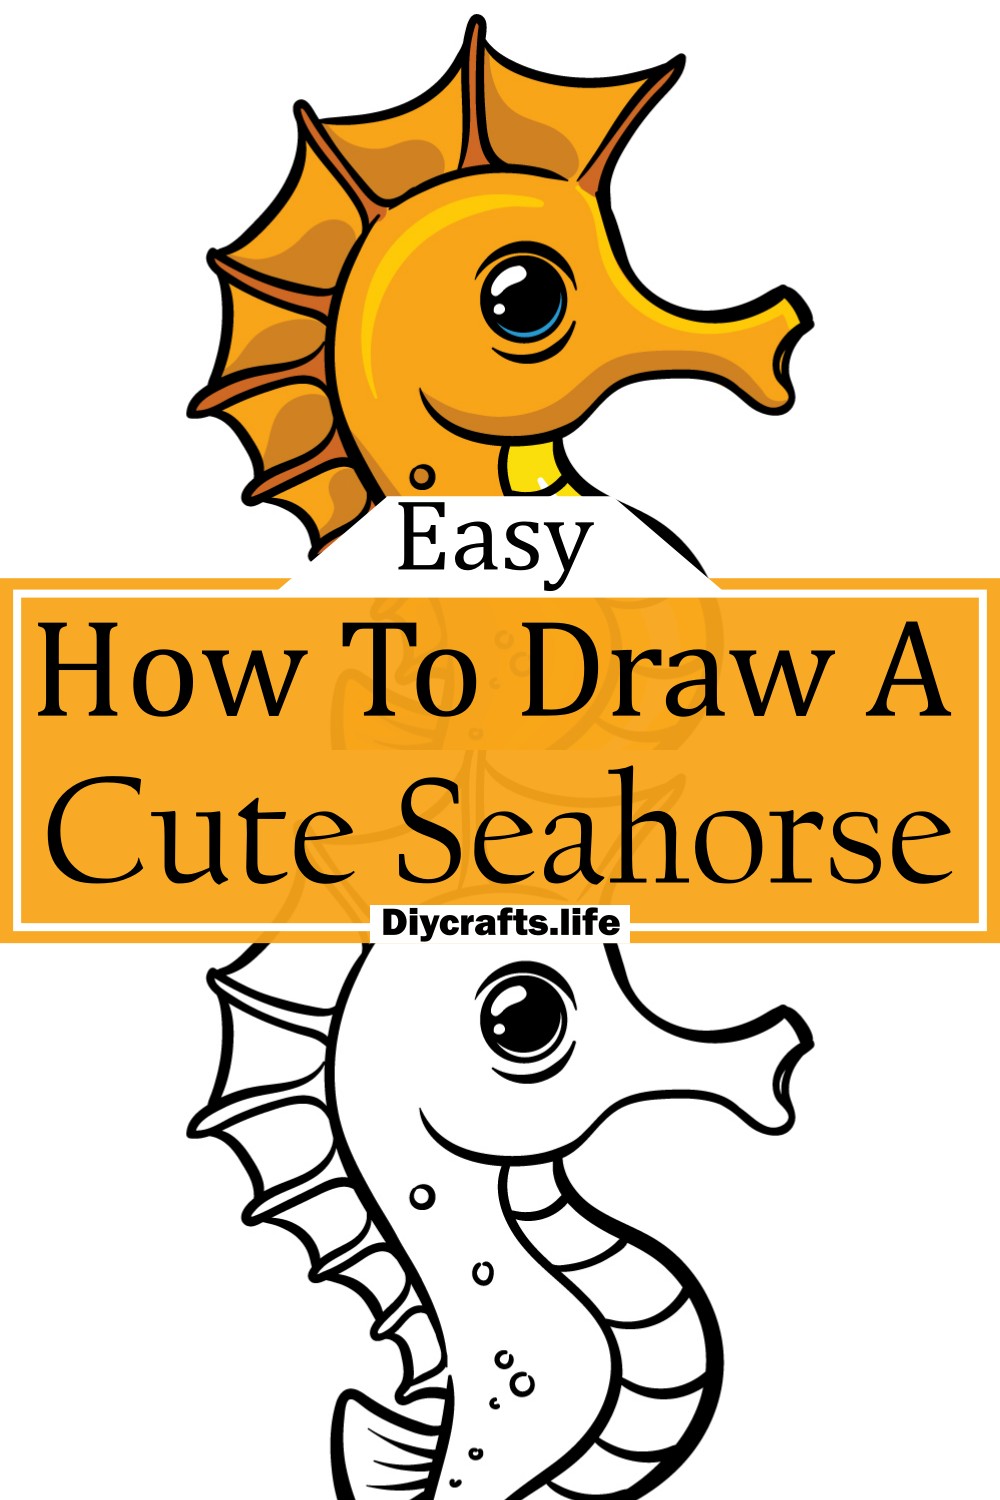 How To Draw A Cute Seahorse